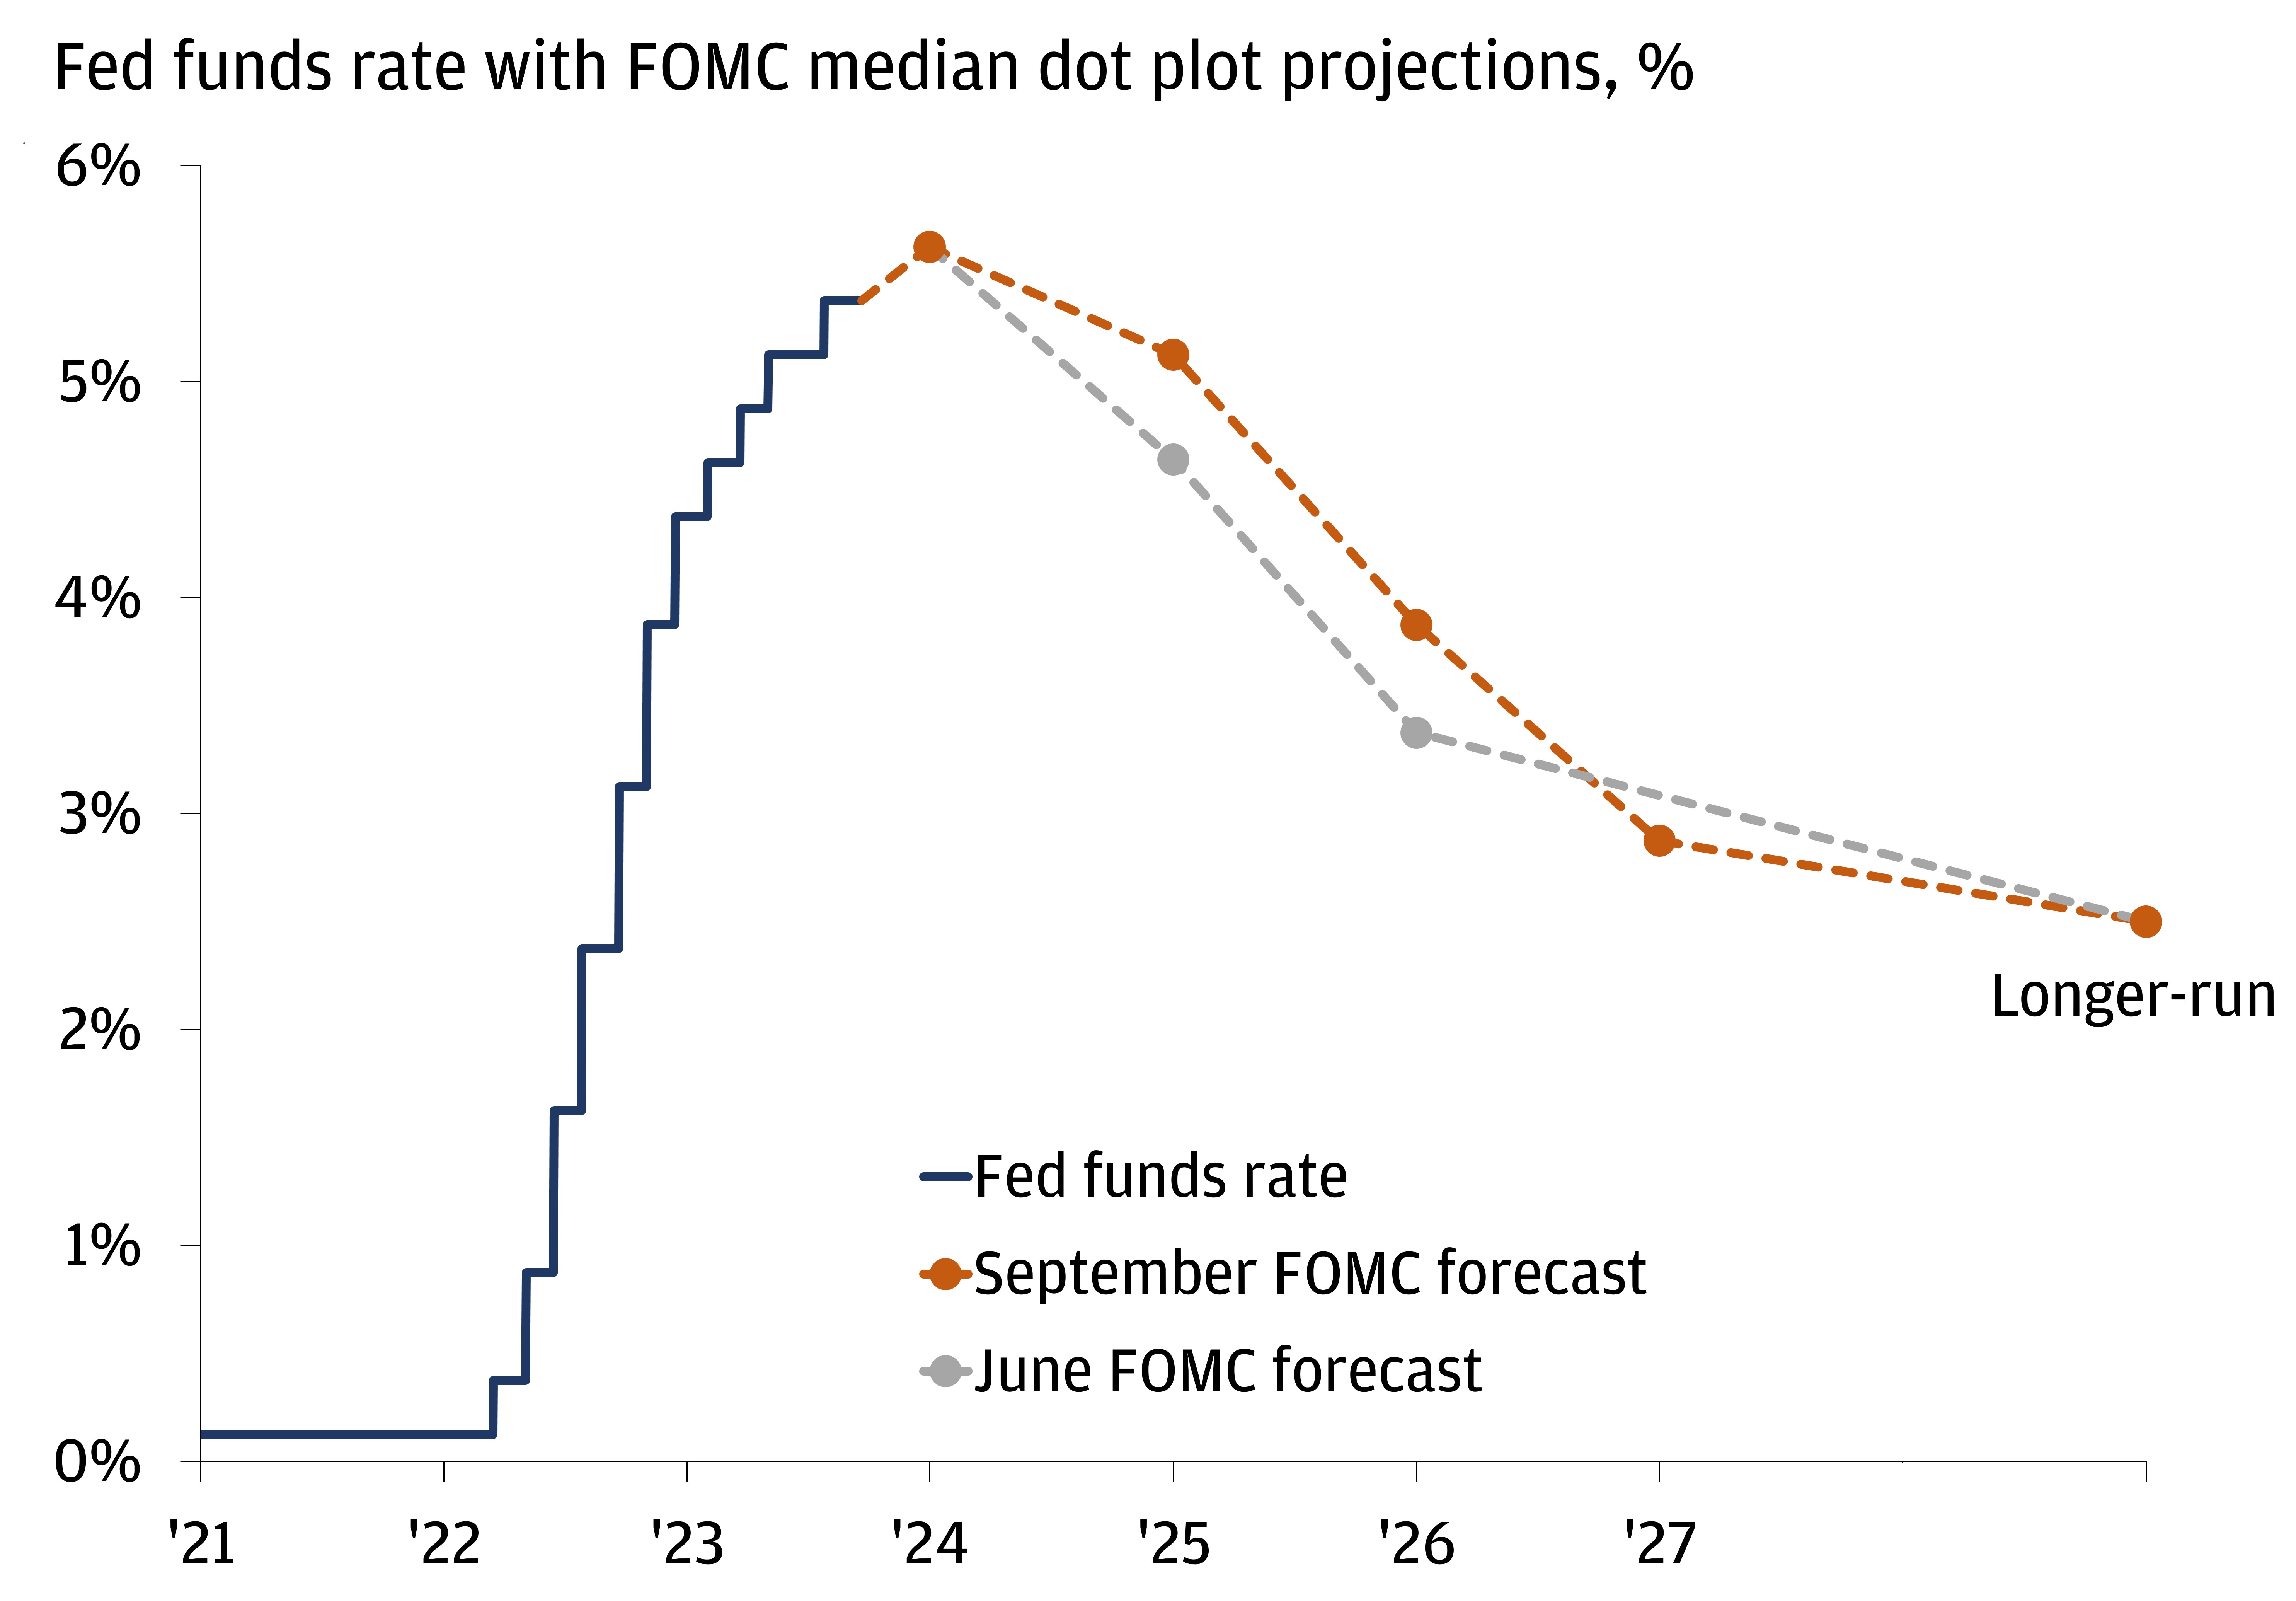 This chart shows the fed funds rate with the FOMC median dot plot projections for June and September.